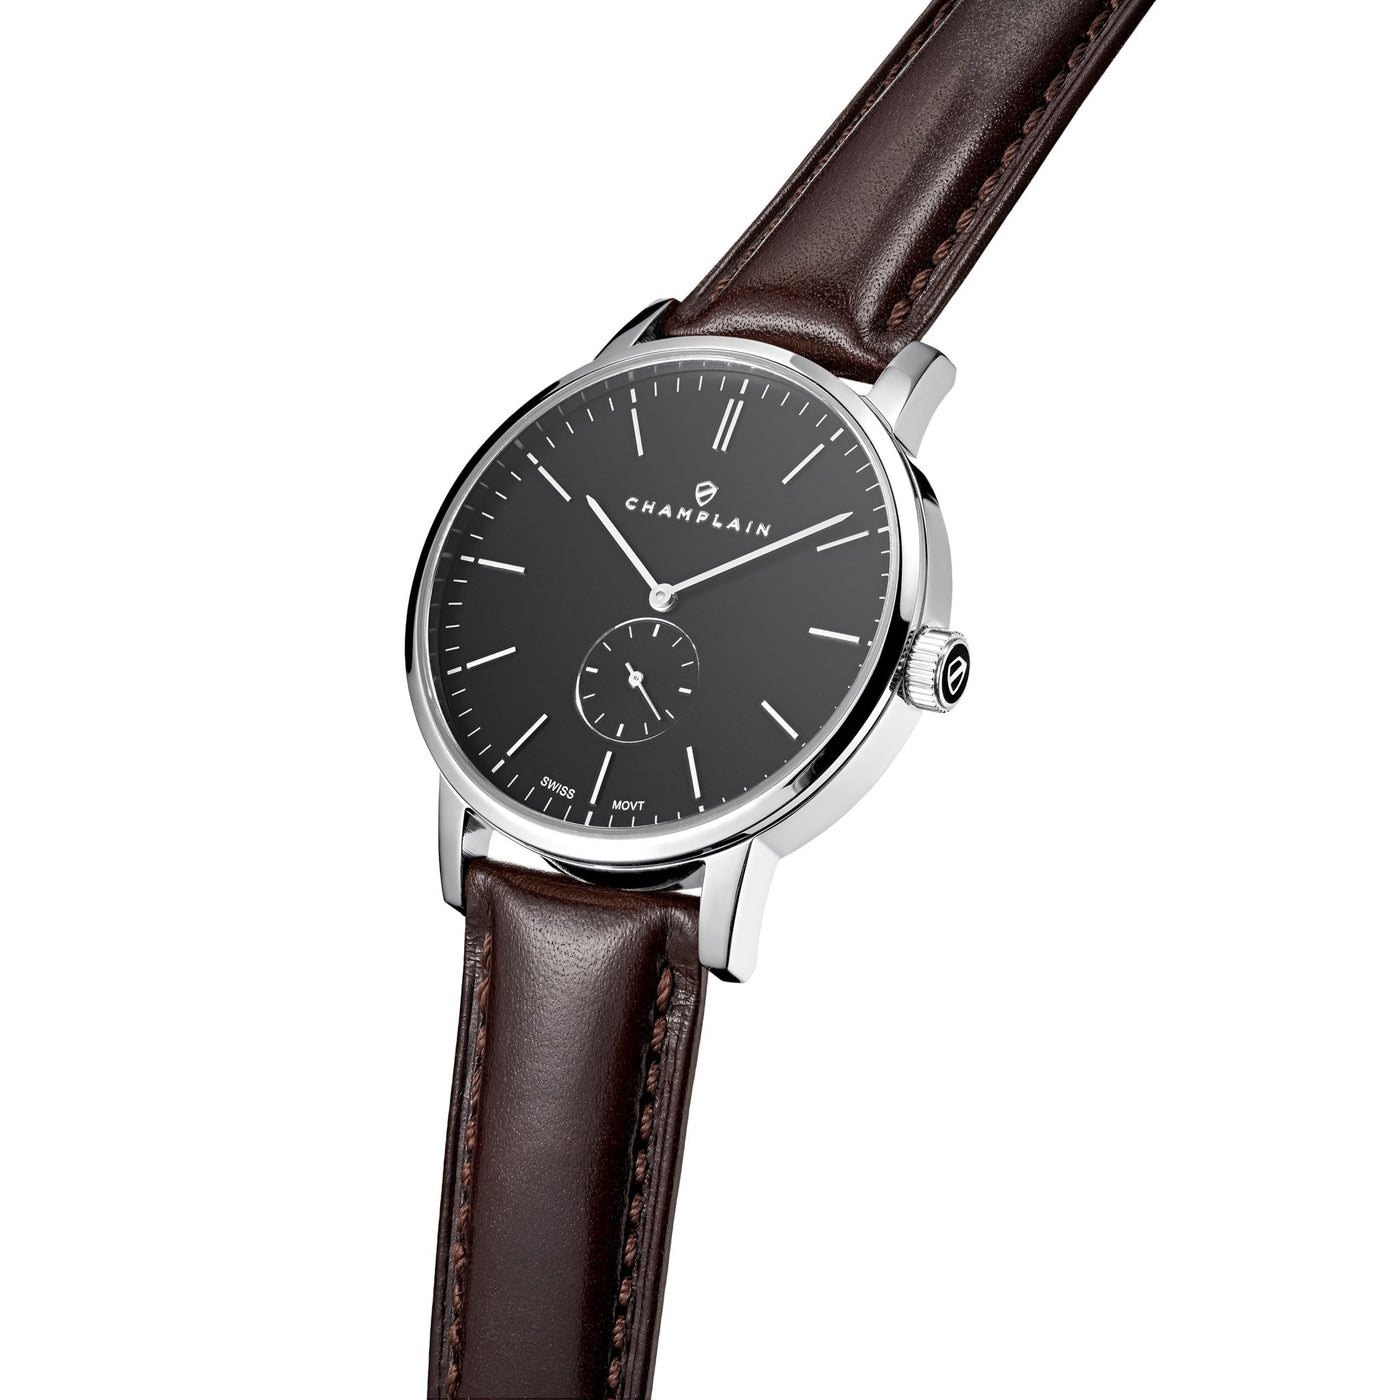 Silver/Black - Brown Governor Watch by Champlain